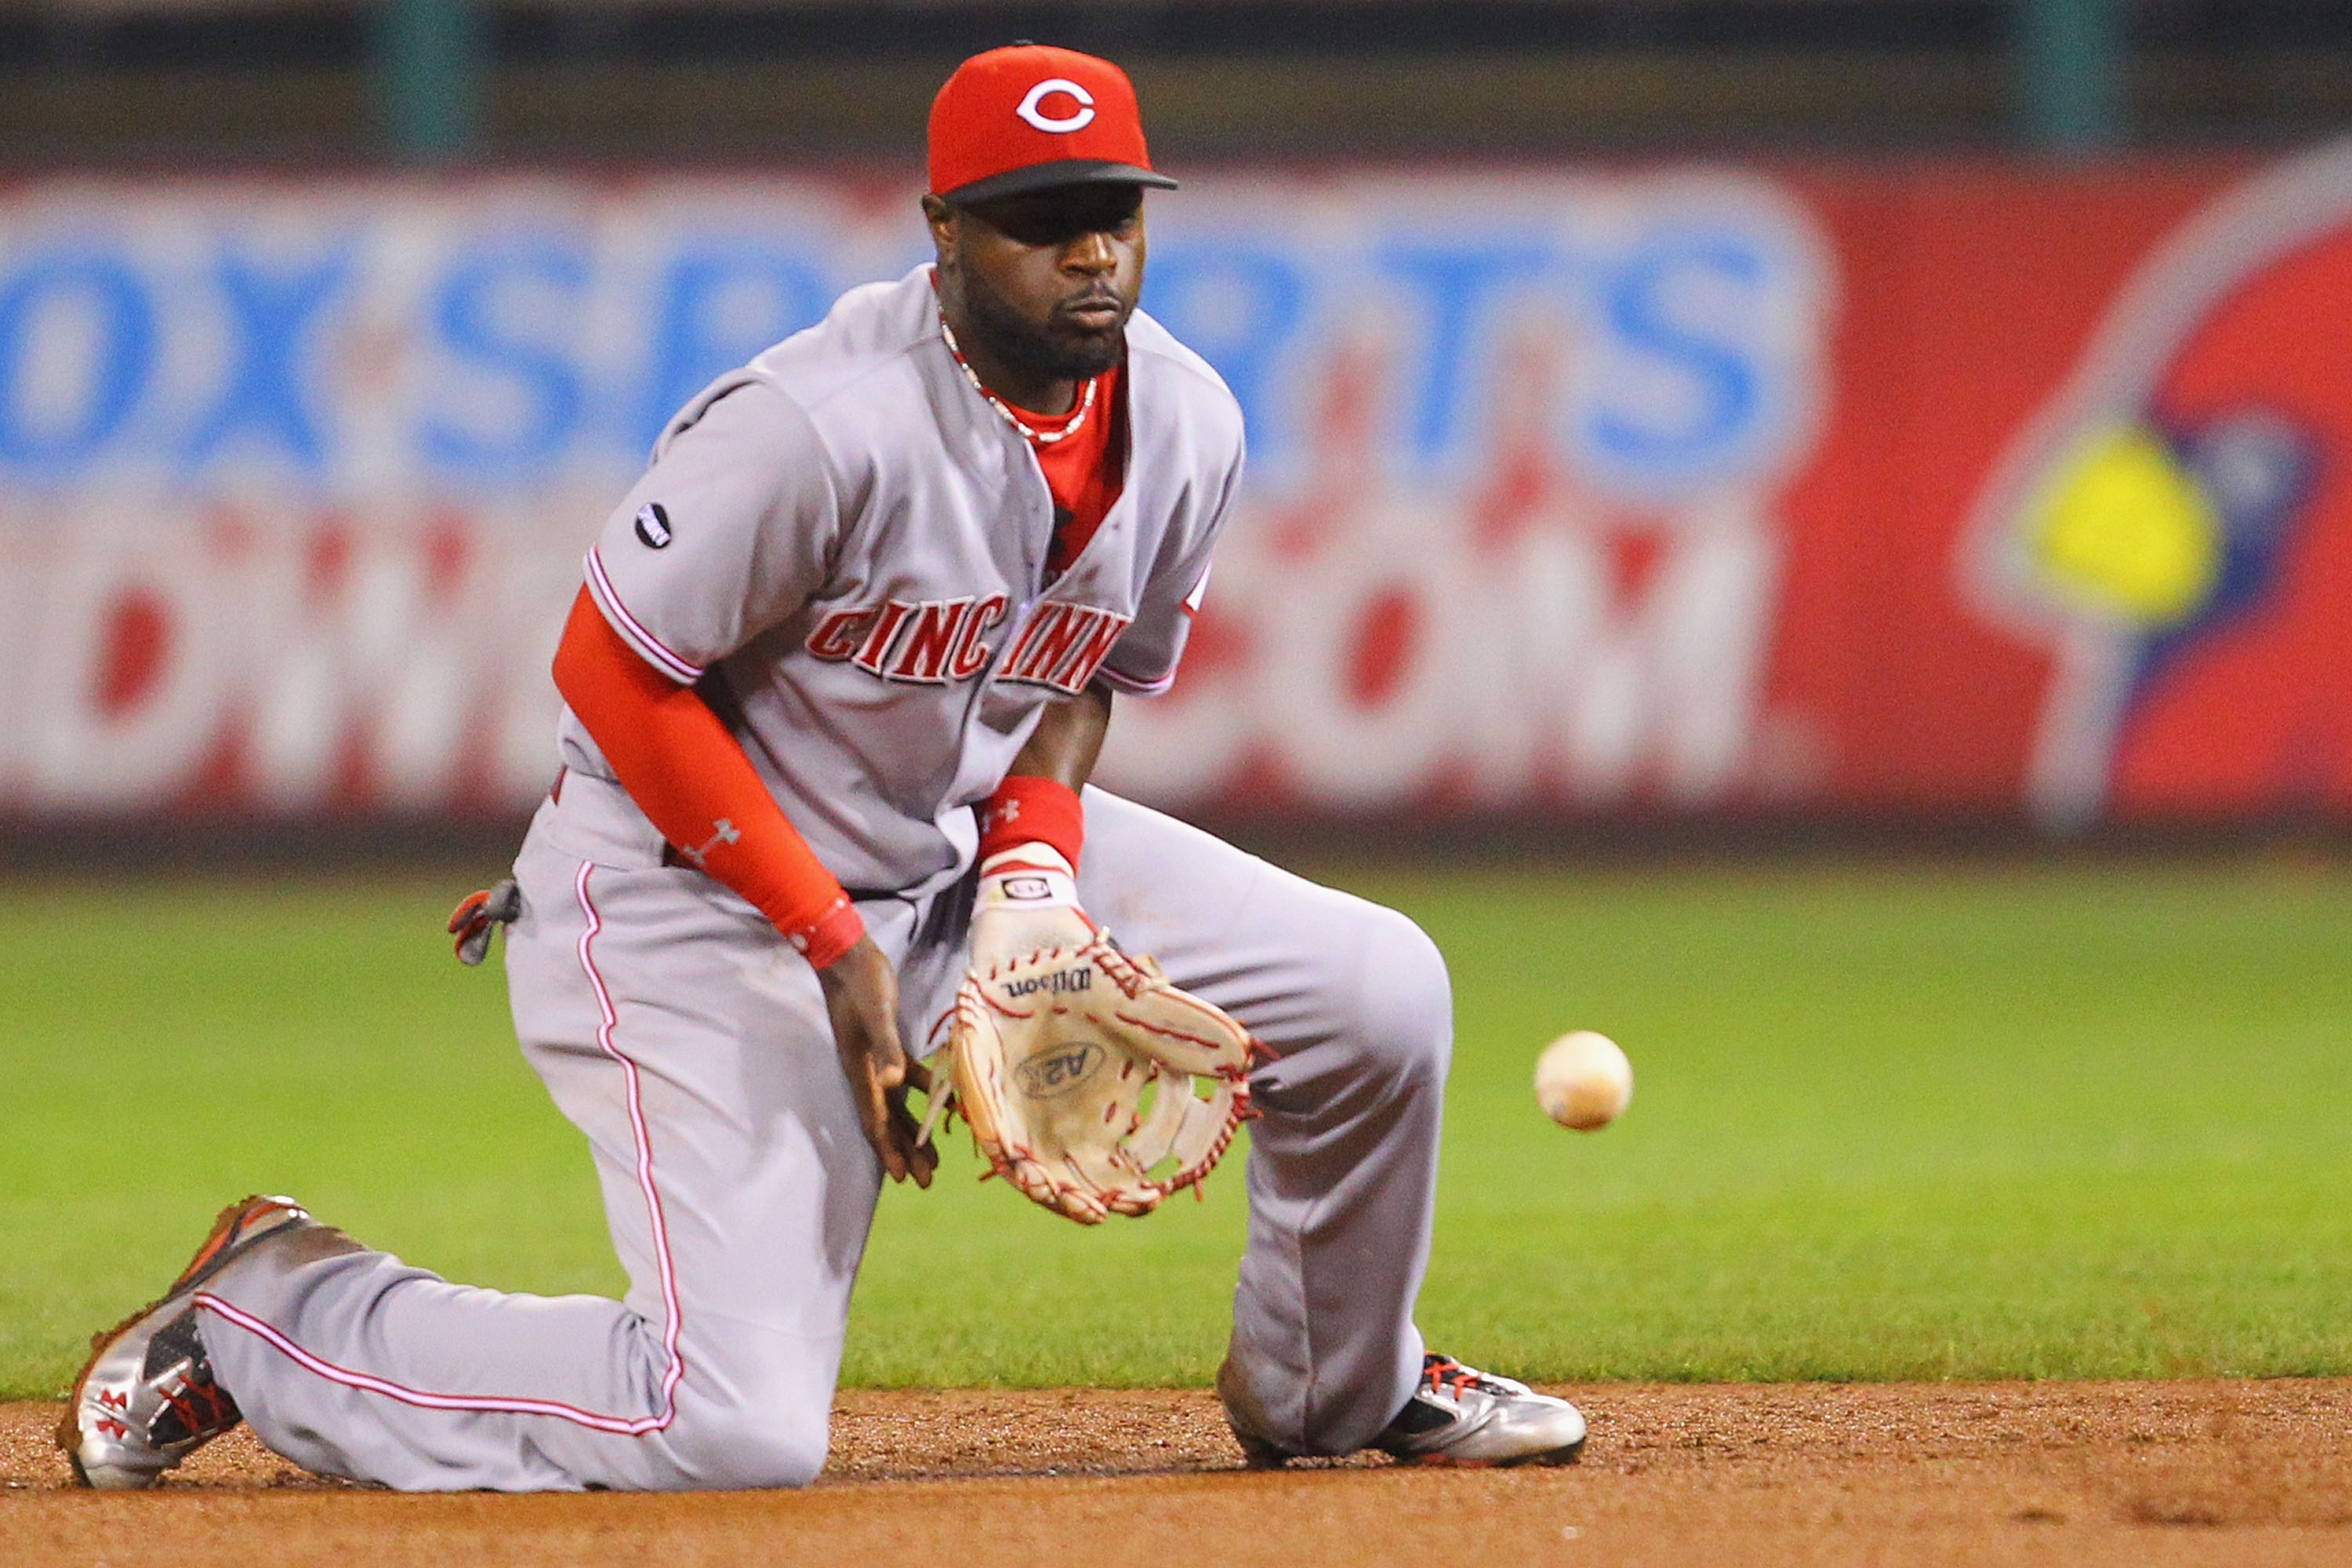 ST. LOUIS, MO - APRIL 22: Brandon Phillips #4 of the Cincinnati Reds fields a ground ball against the St. Louis Cardinals at Busch Stadium on April 22, 2011 in St. Louis, Missouri.  (Photo by Dilip Vishwanat/Getty Images)